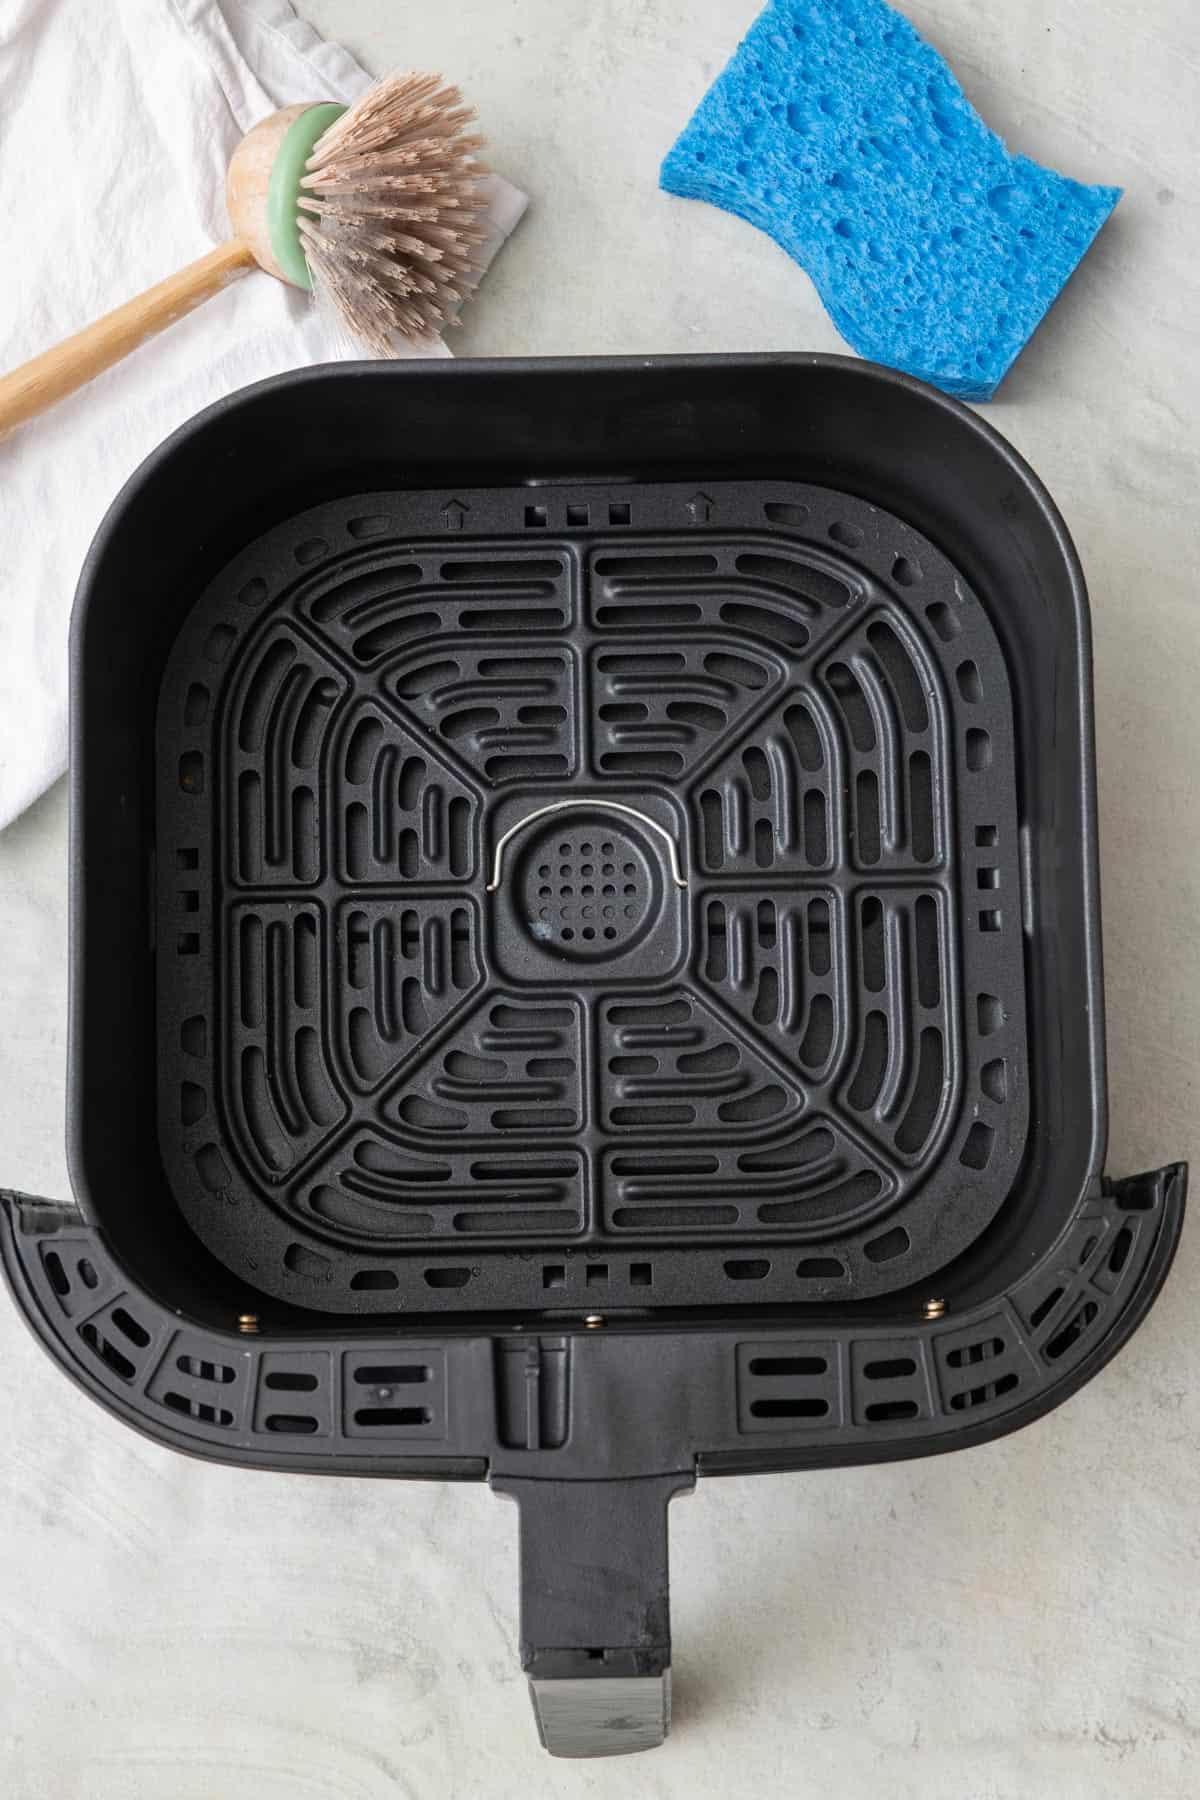 A cleaned up air fryer basket with a scrub brush and sponge nearby.